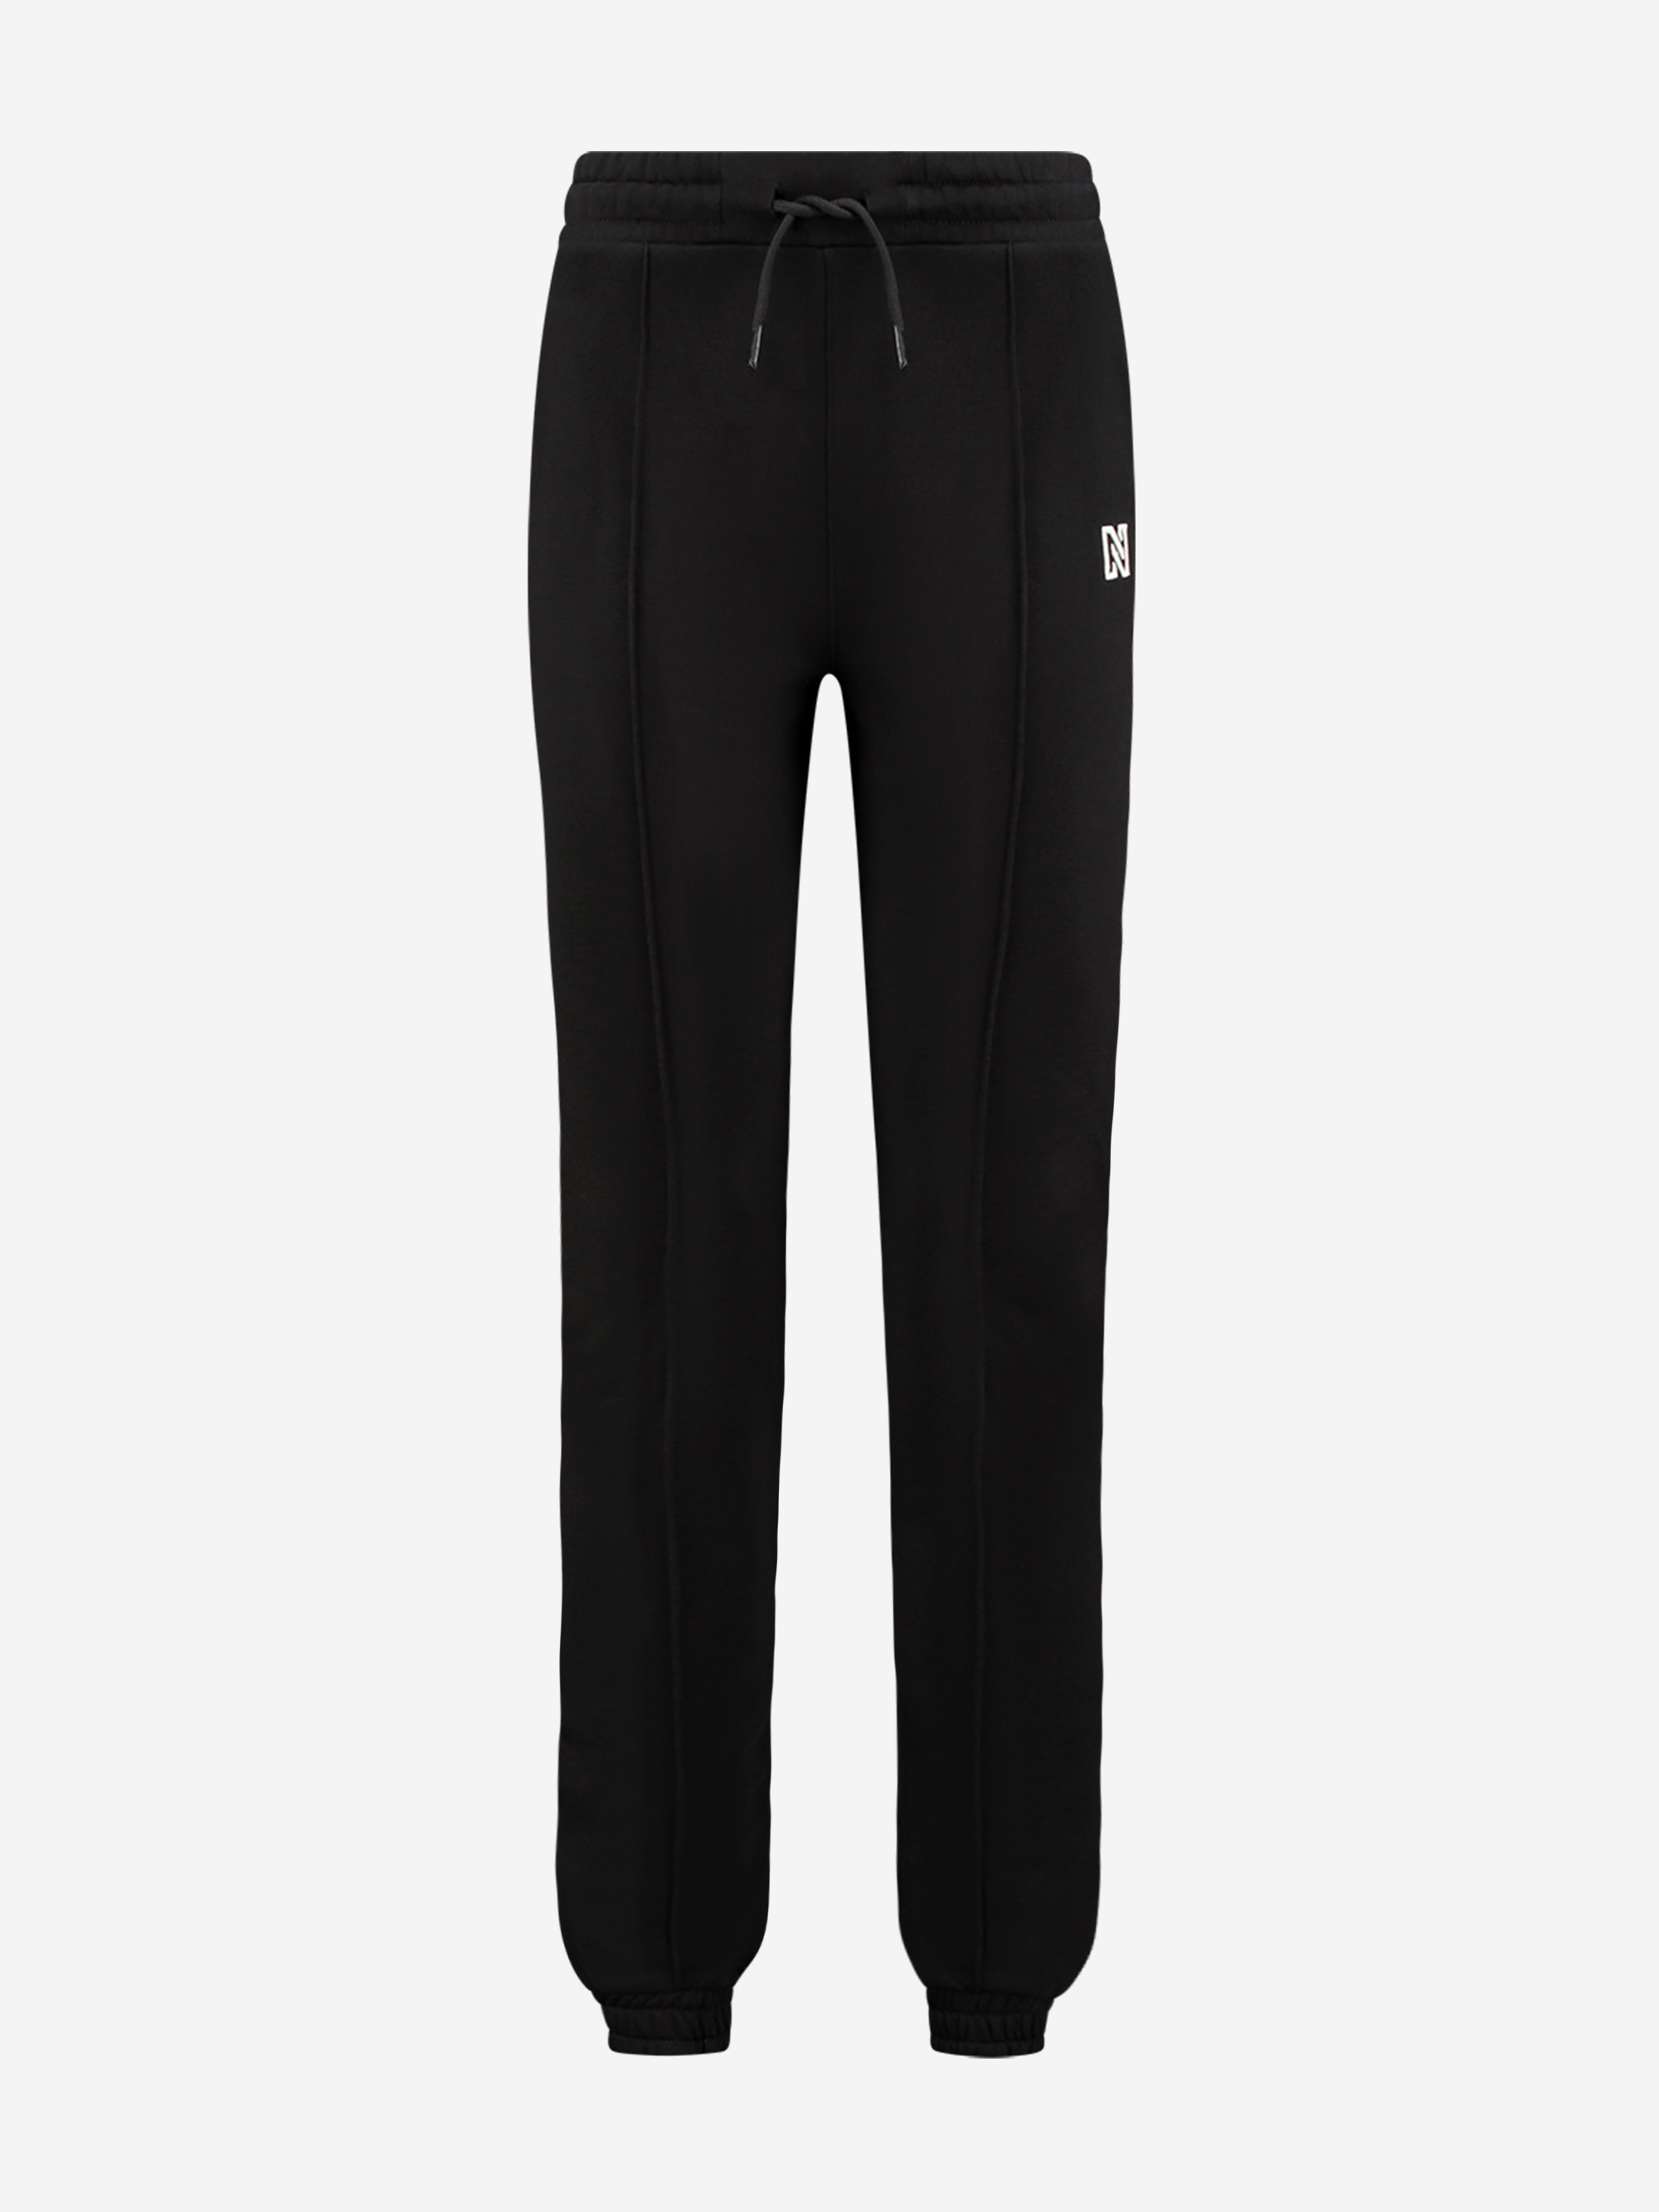 Sweat pants with high rise